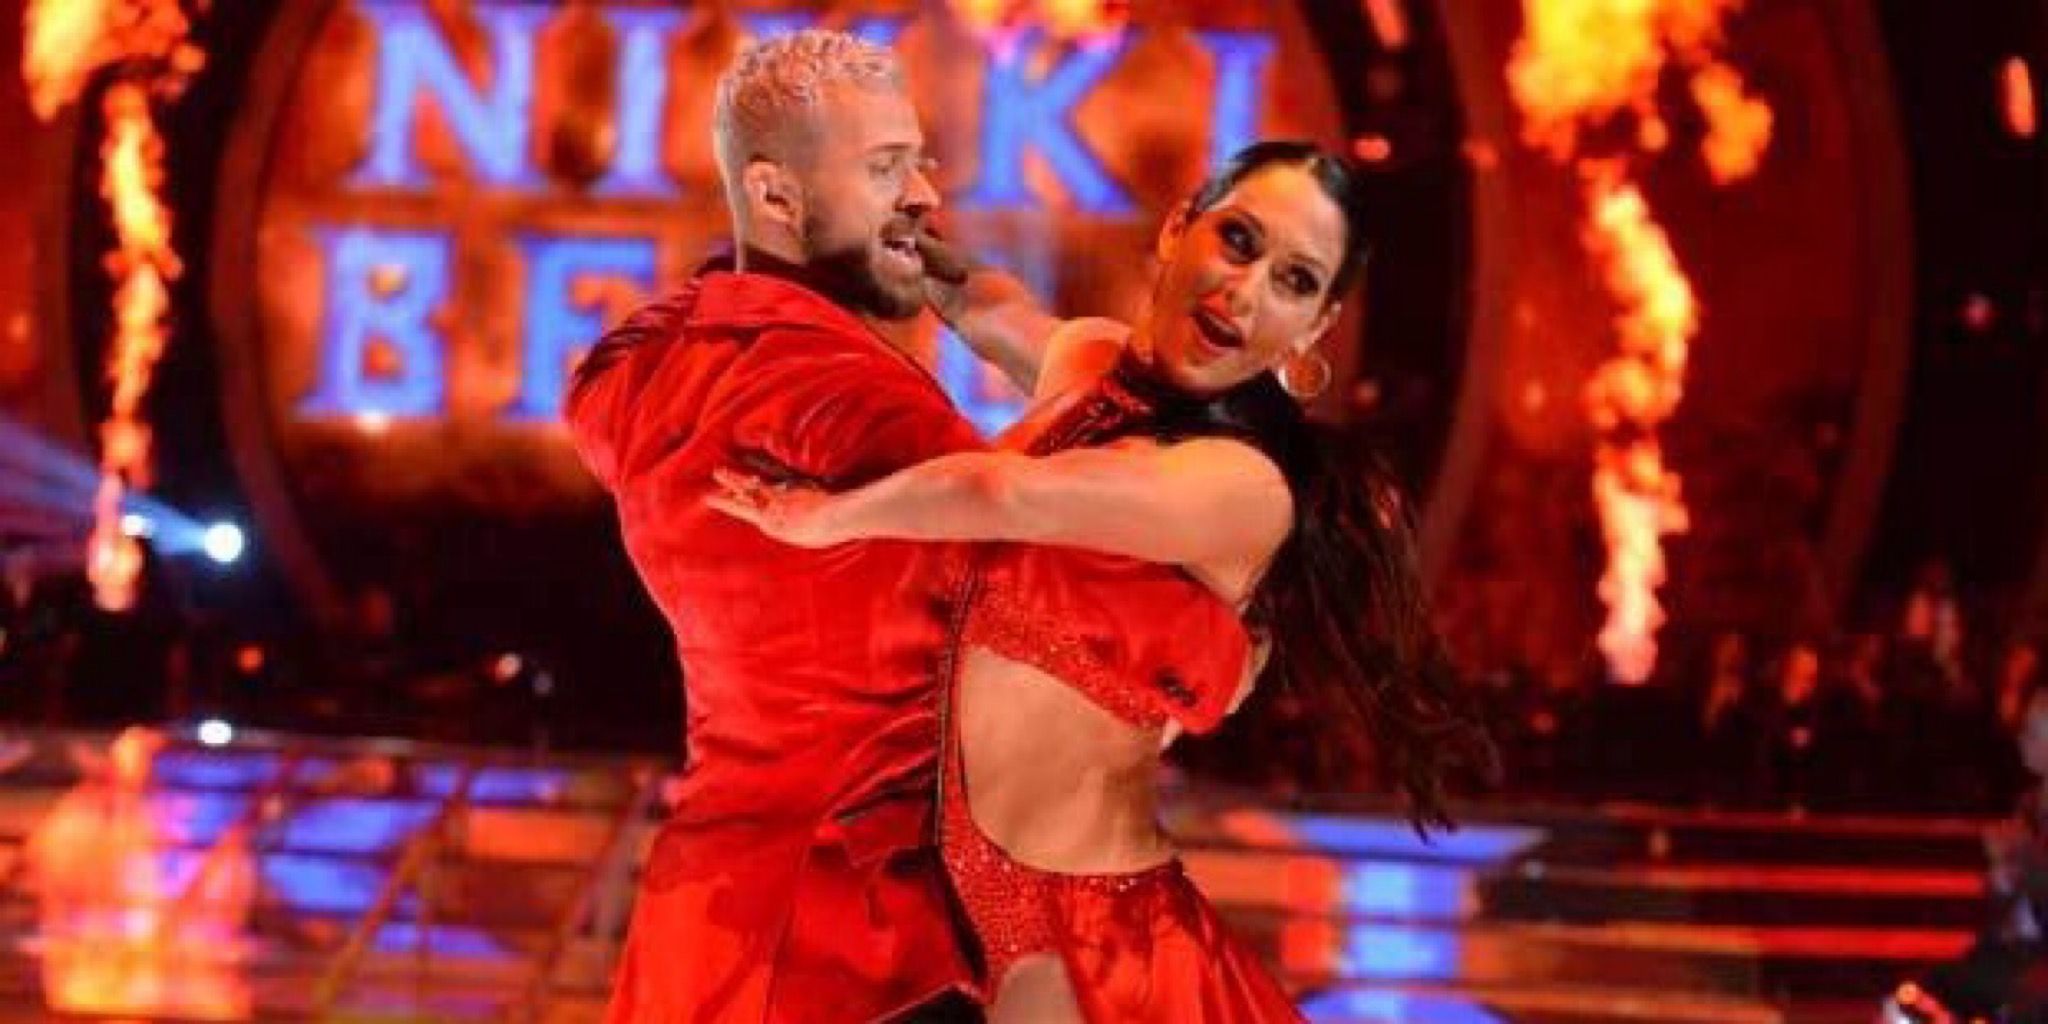 Nikki Bella and Artem Chigvintsev on Dancing With The Stars Season 25